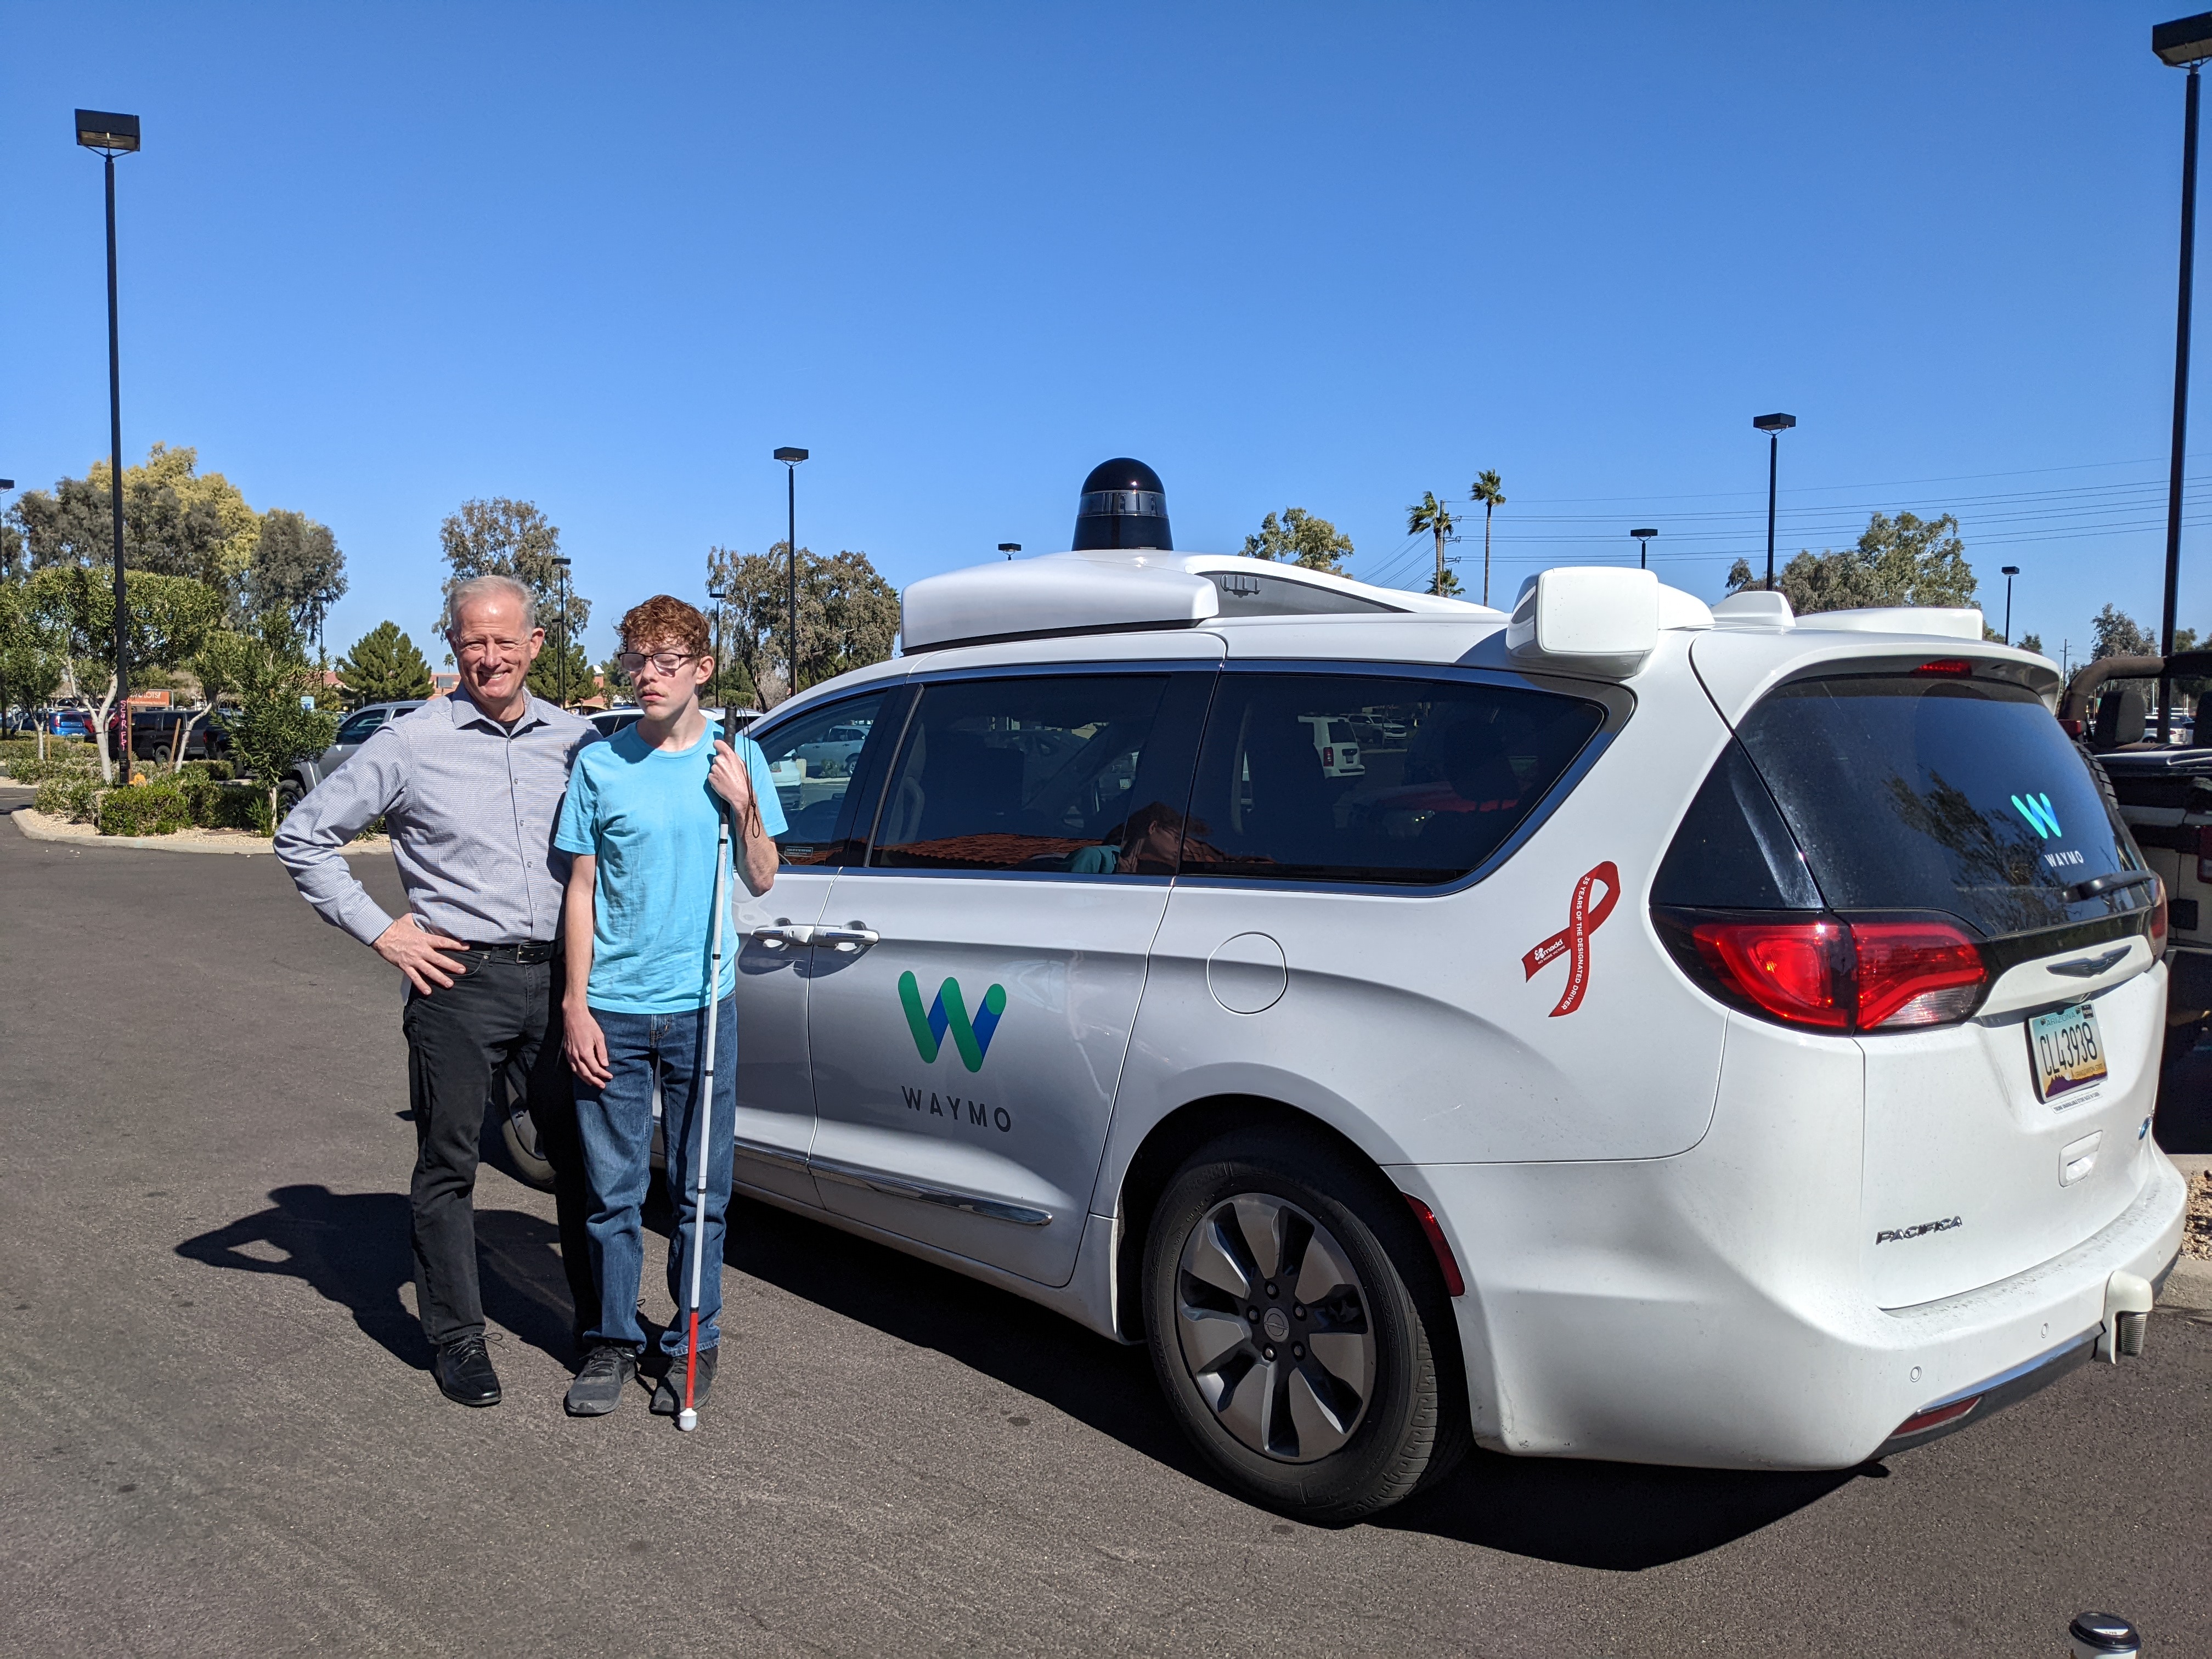 Man and woman, Marc Ashton and Ethan Roberts, standing in front of Waymo autonomous vehicle